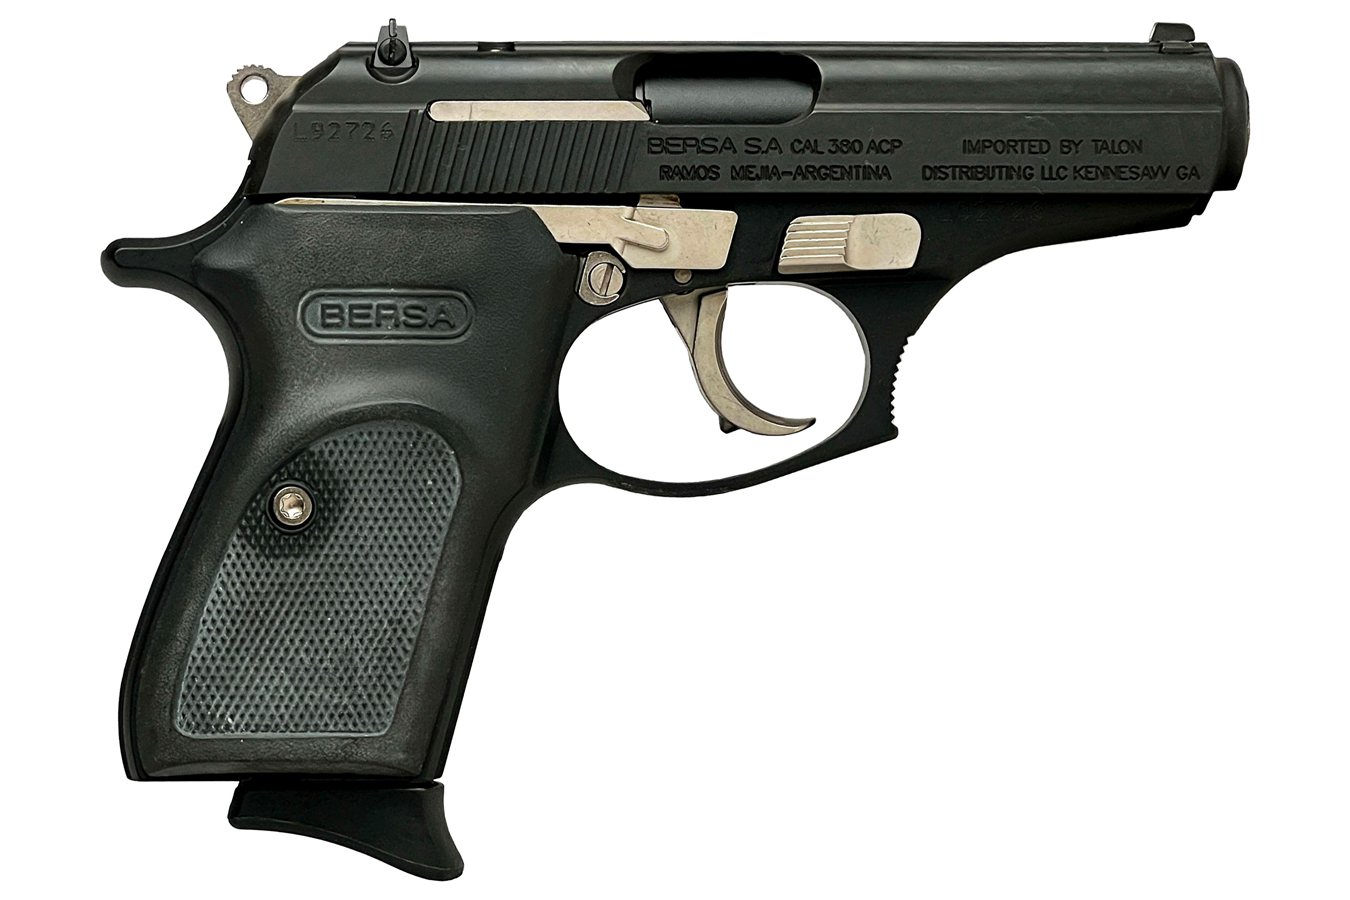 THUNDER 380 .380 ACP PISTOL WITH NICKEL ACCENTS